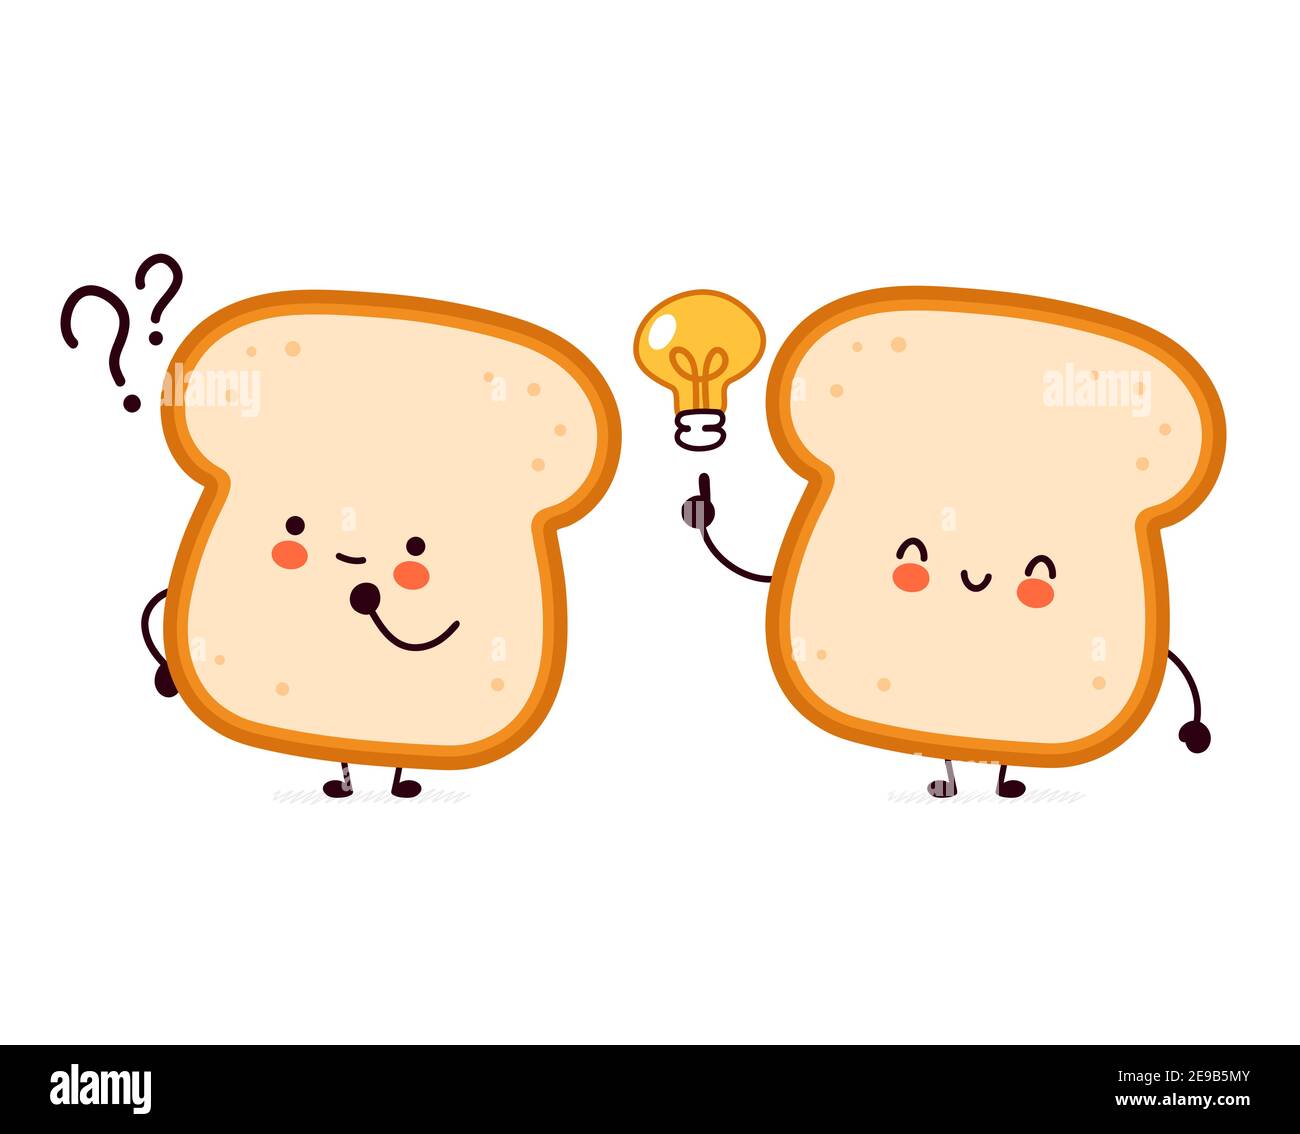 Cute funny bread toast character with question mark and idea lightbulb. Vector flat line cartoon kawaii character illustration icon. Isolated on white background. Toast face character mascot concept Stock Vector